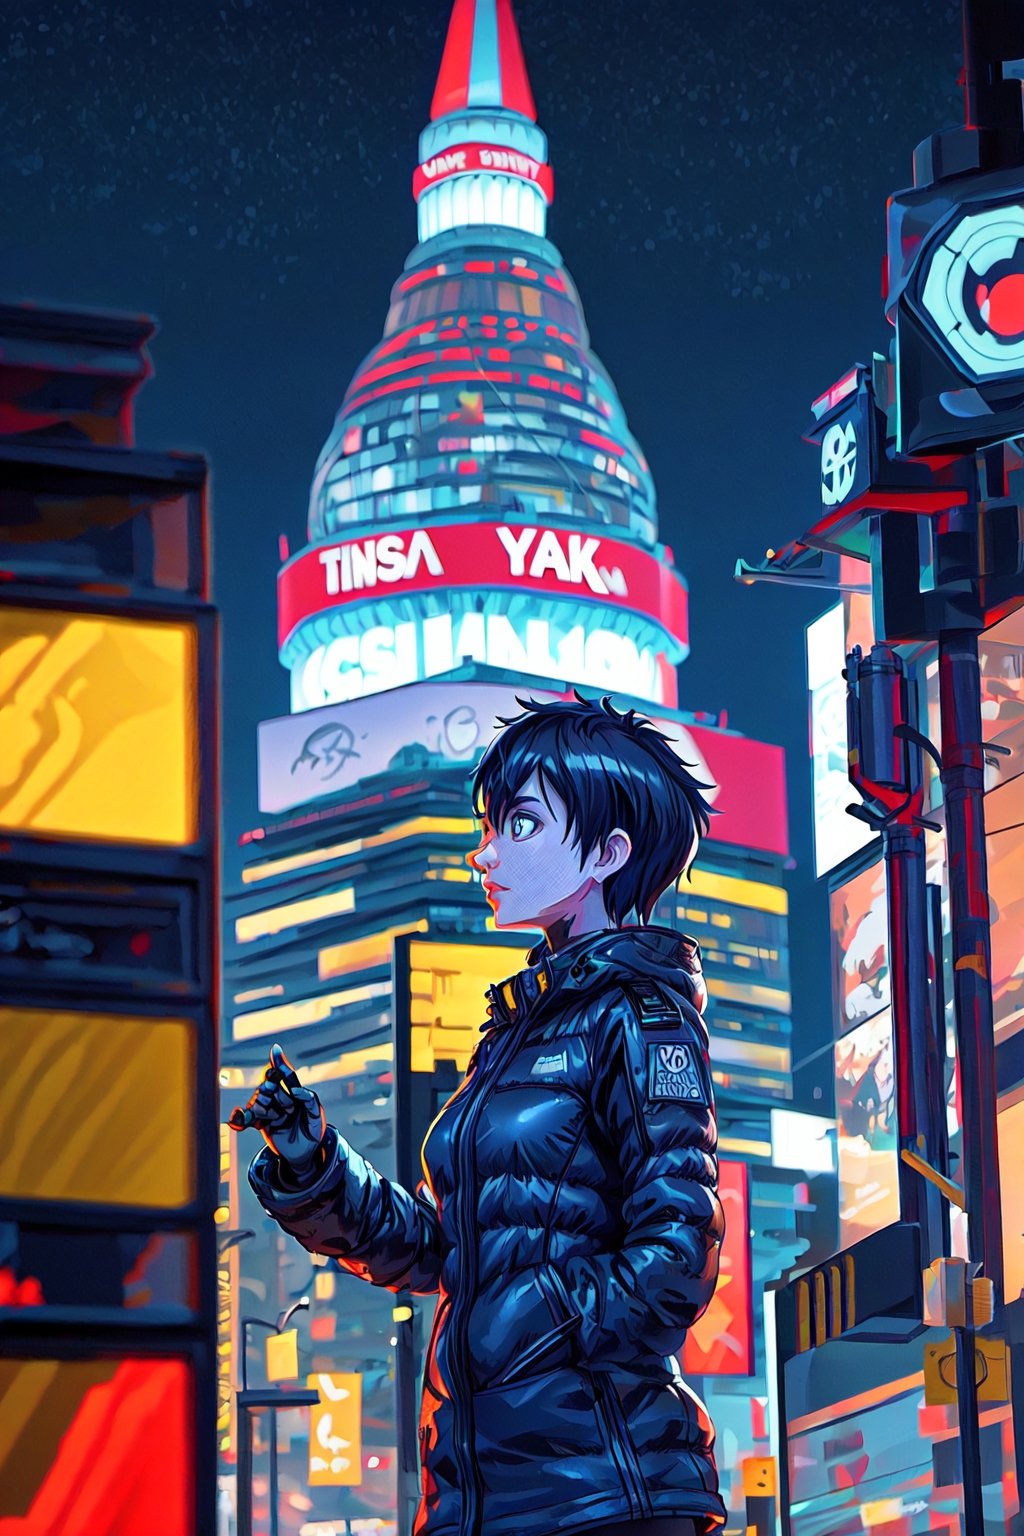 A digital illustration of a ((("Sci-Fi Anime Boy"))) in a futuristic cyberpunk cityscape. The character should have futuristic cyber enhancements, and the city should be filled with neon lights and advanced technology. The art style should be influenced by classic cyberpunk aesthetics. Use a fish-eye lens for a dynamic, distorted view of the futuristic world and emphasize the character's cool demeanor.